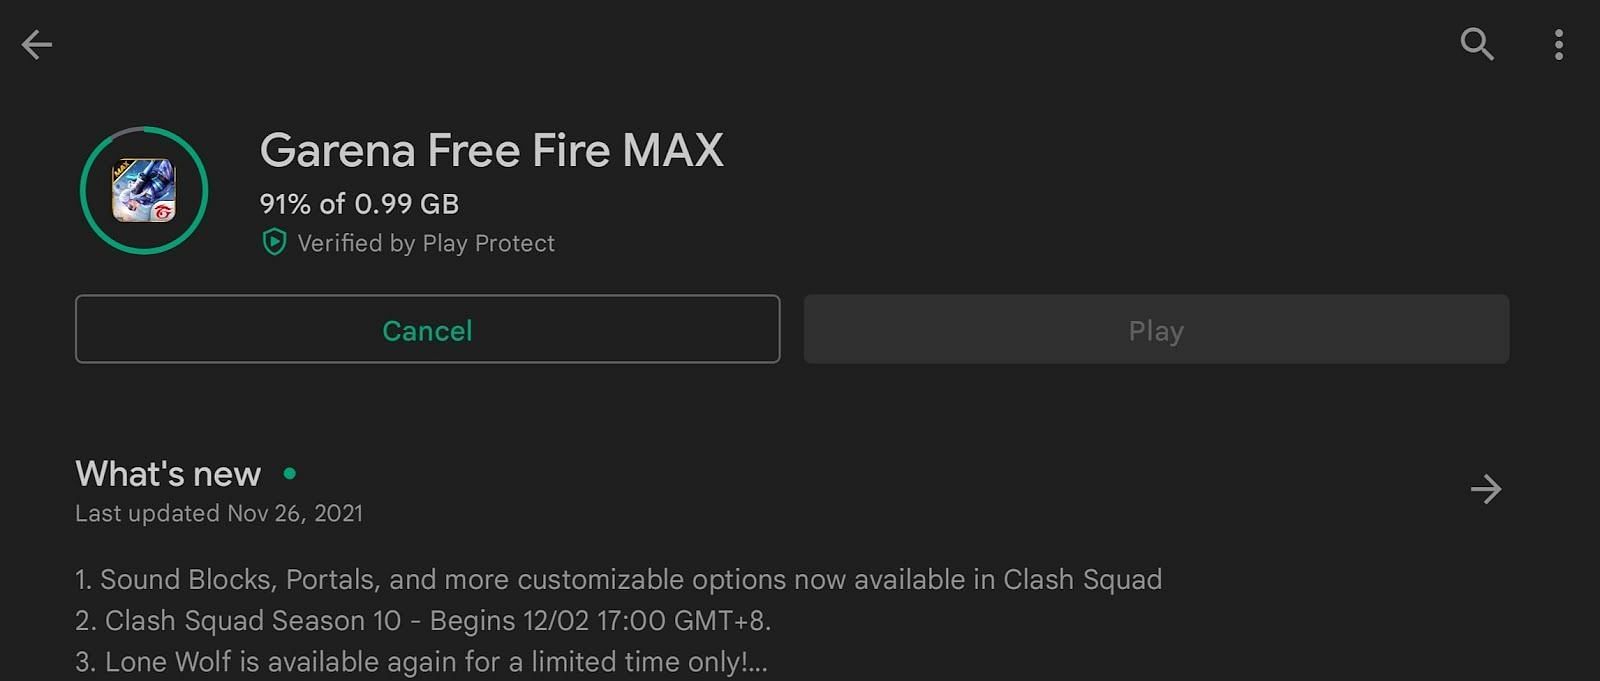 Download size of Garena Free Fire MAX (Image via Google Play)